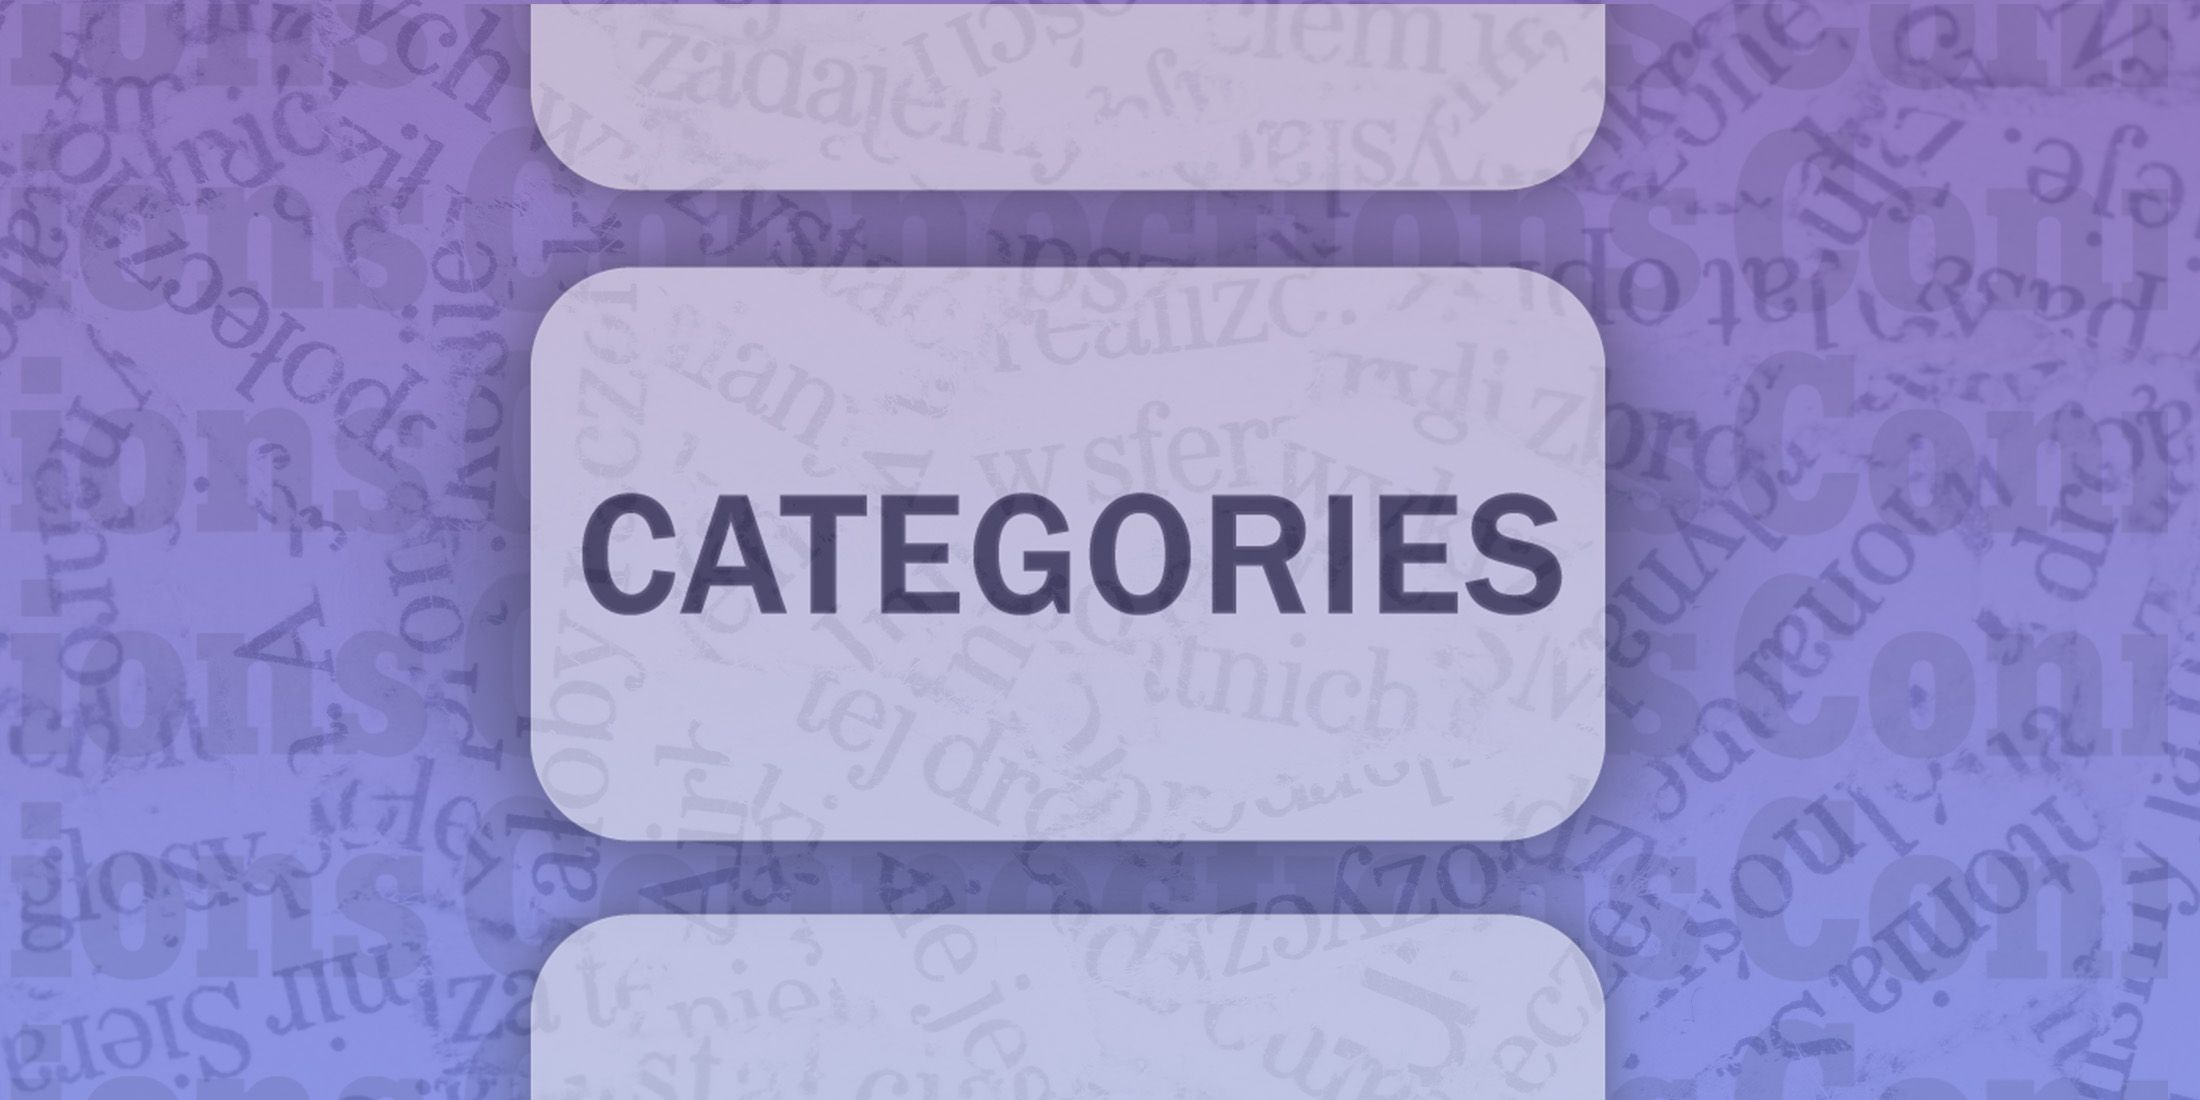 Categories for the June 4th Connections game.